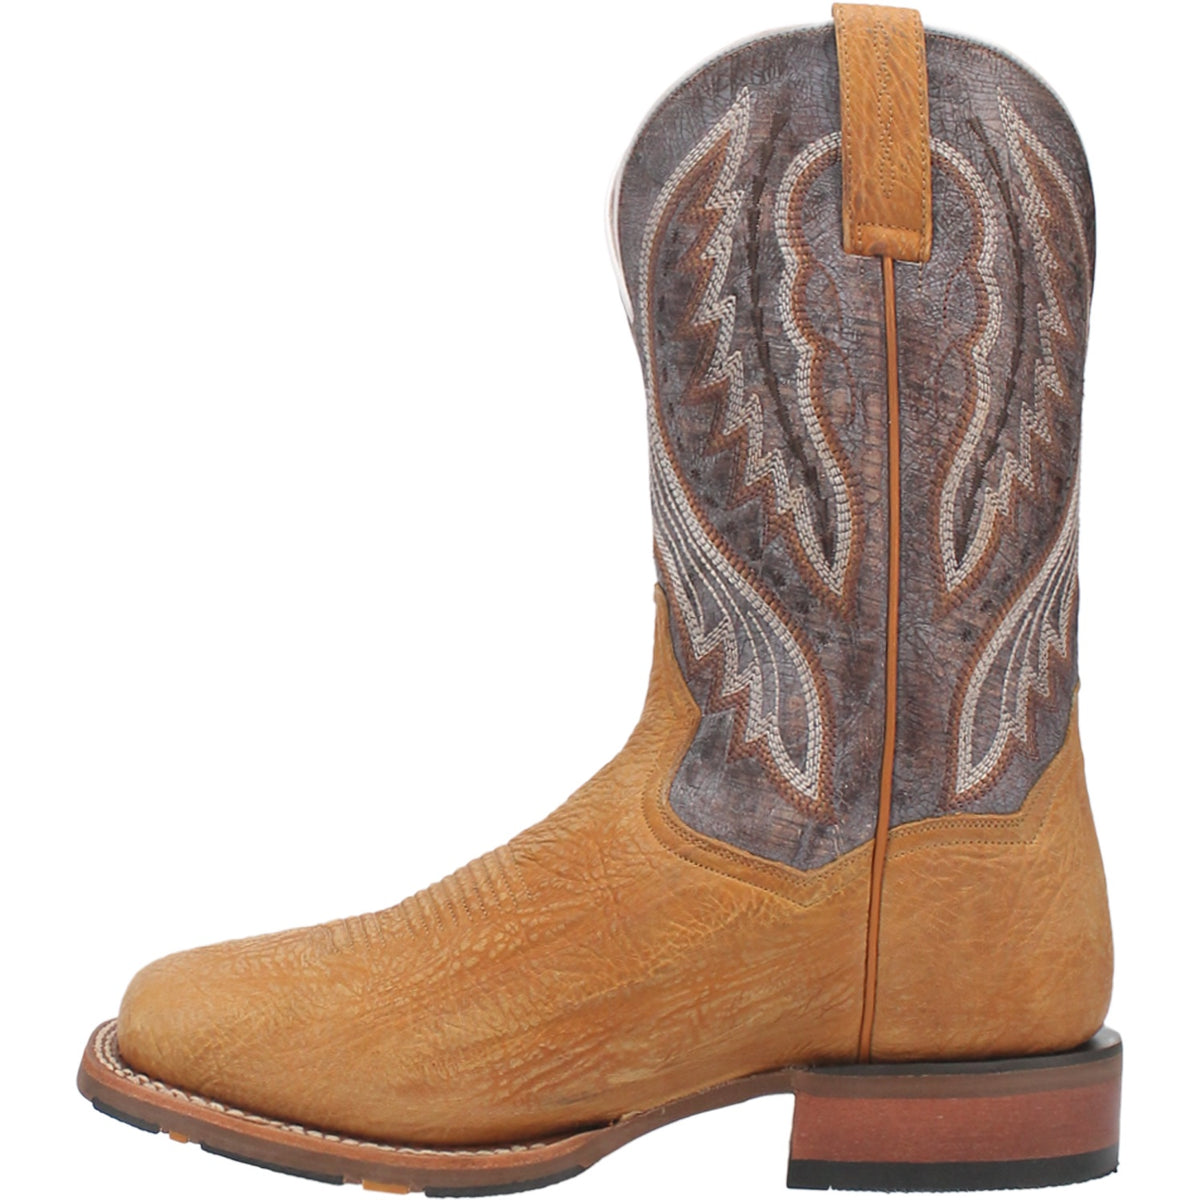 DUGAN BISON LEATHER BOOT